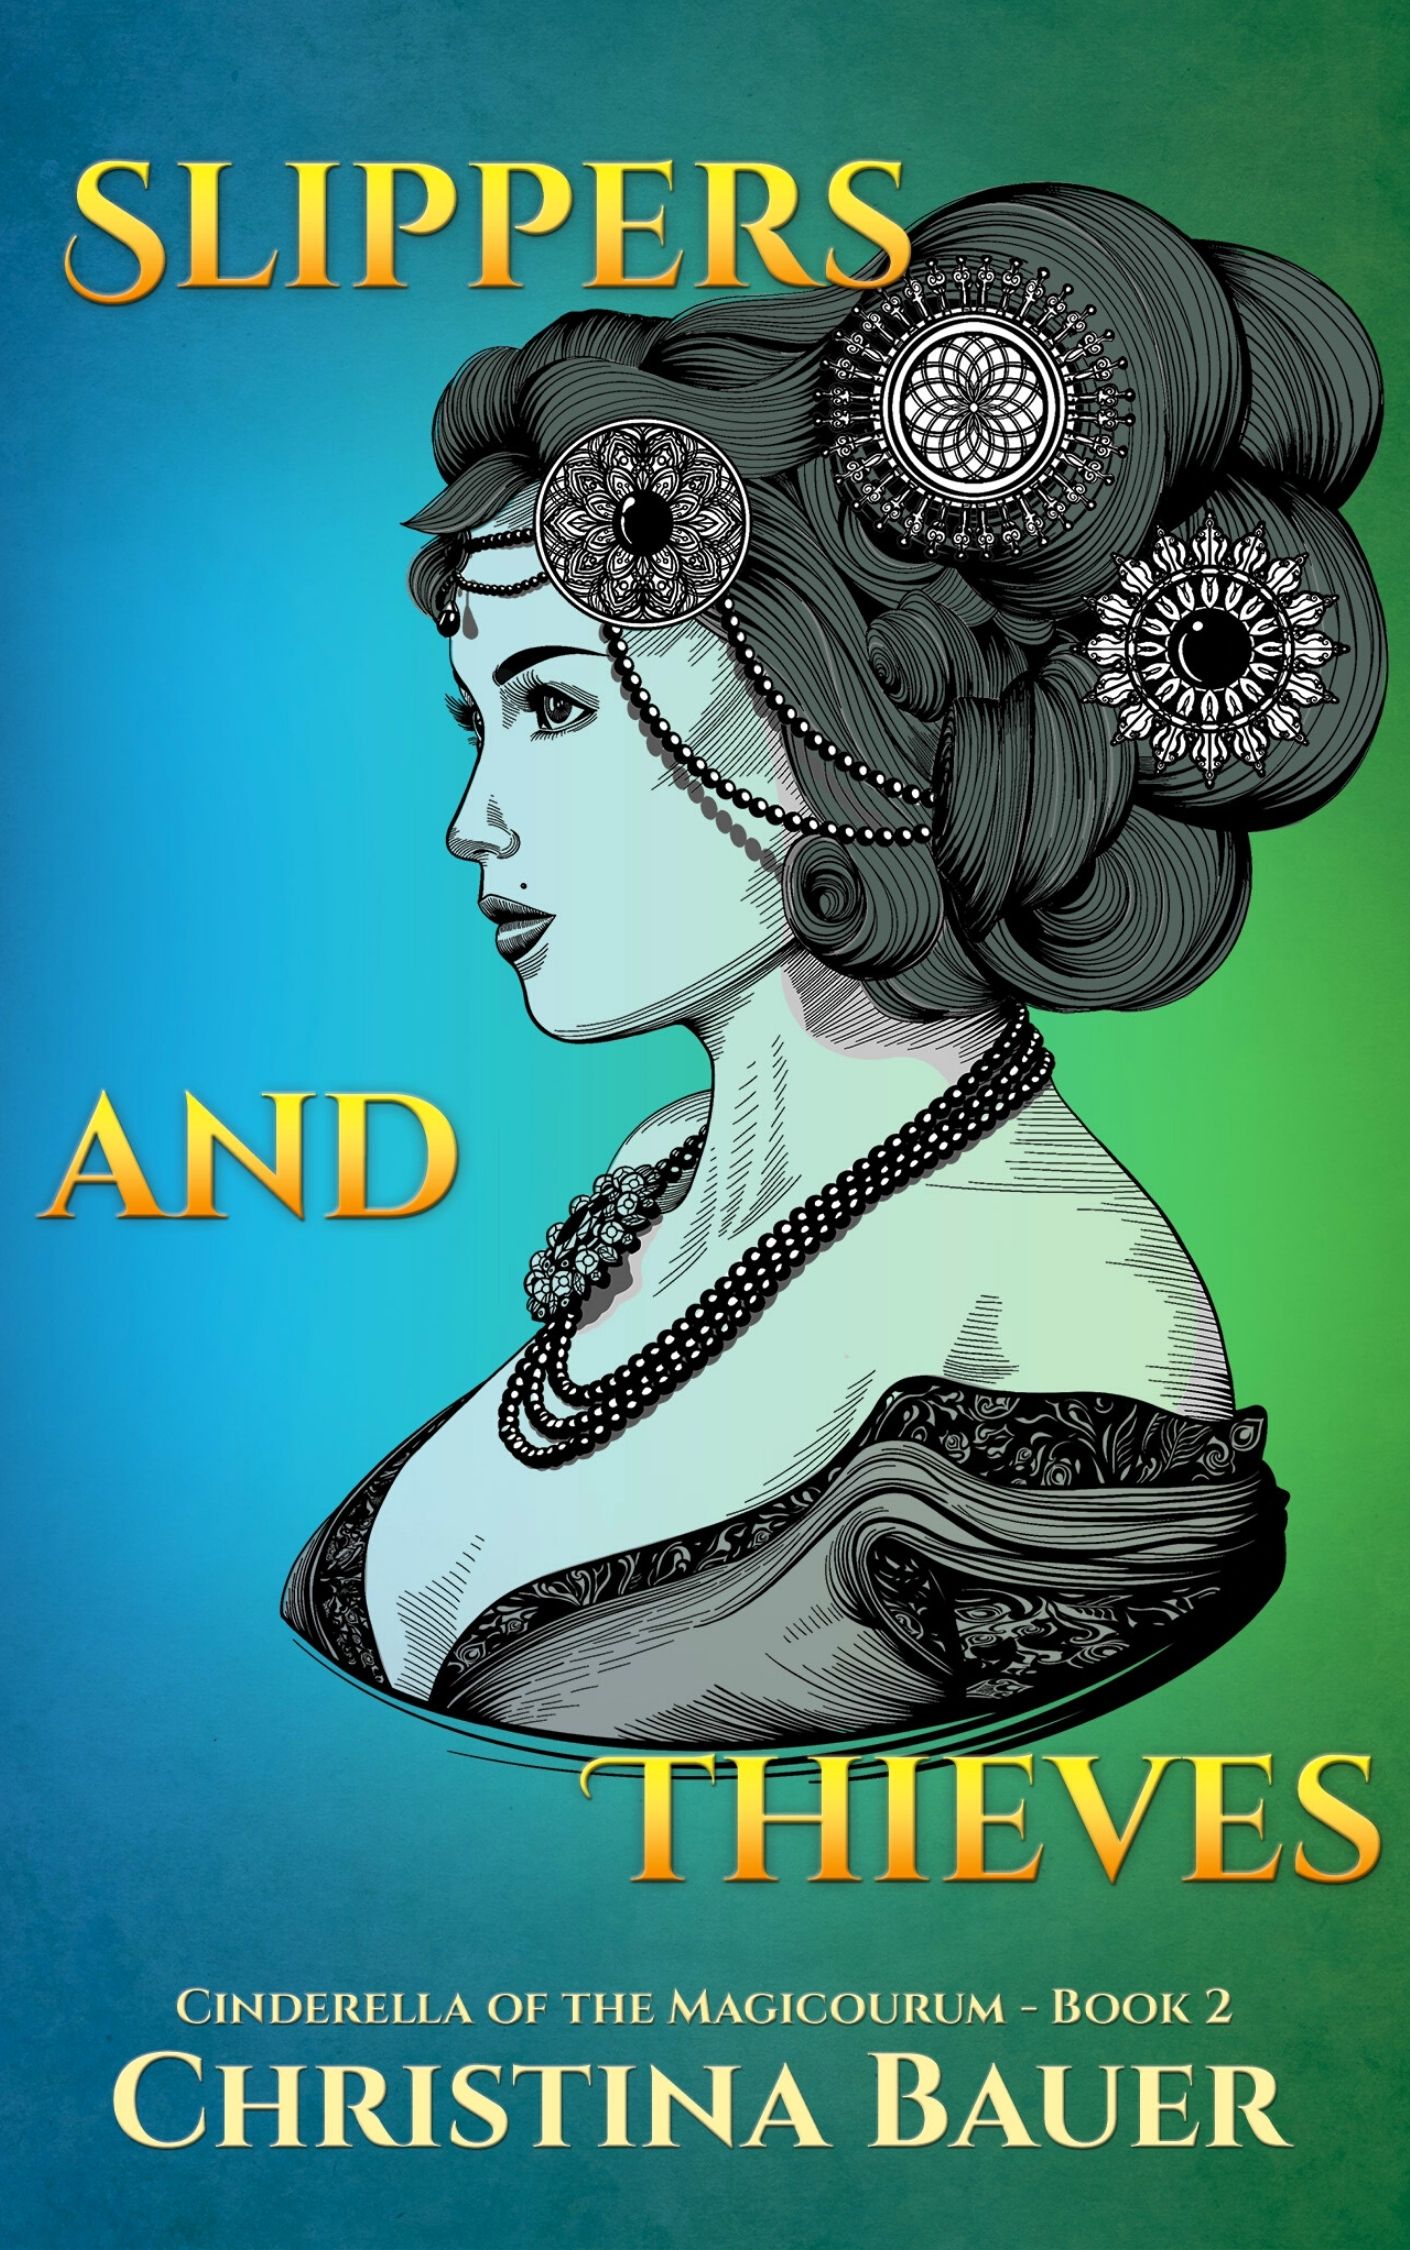 SLIPPERS AND THIEVES (Book 4)